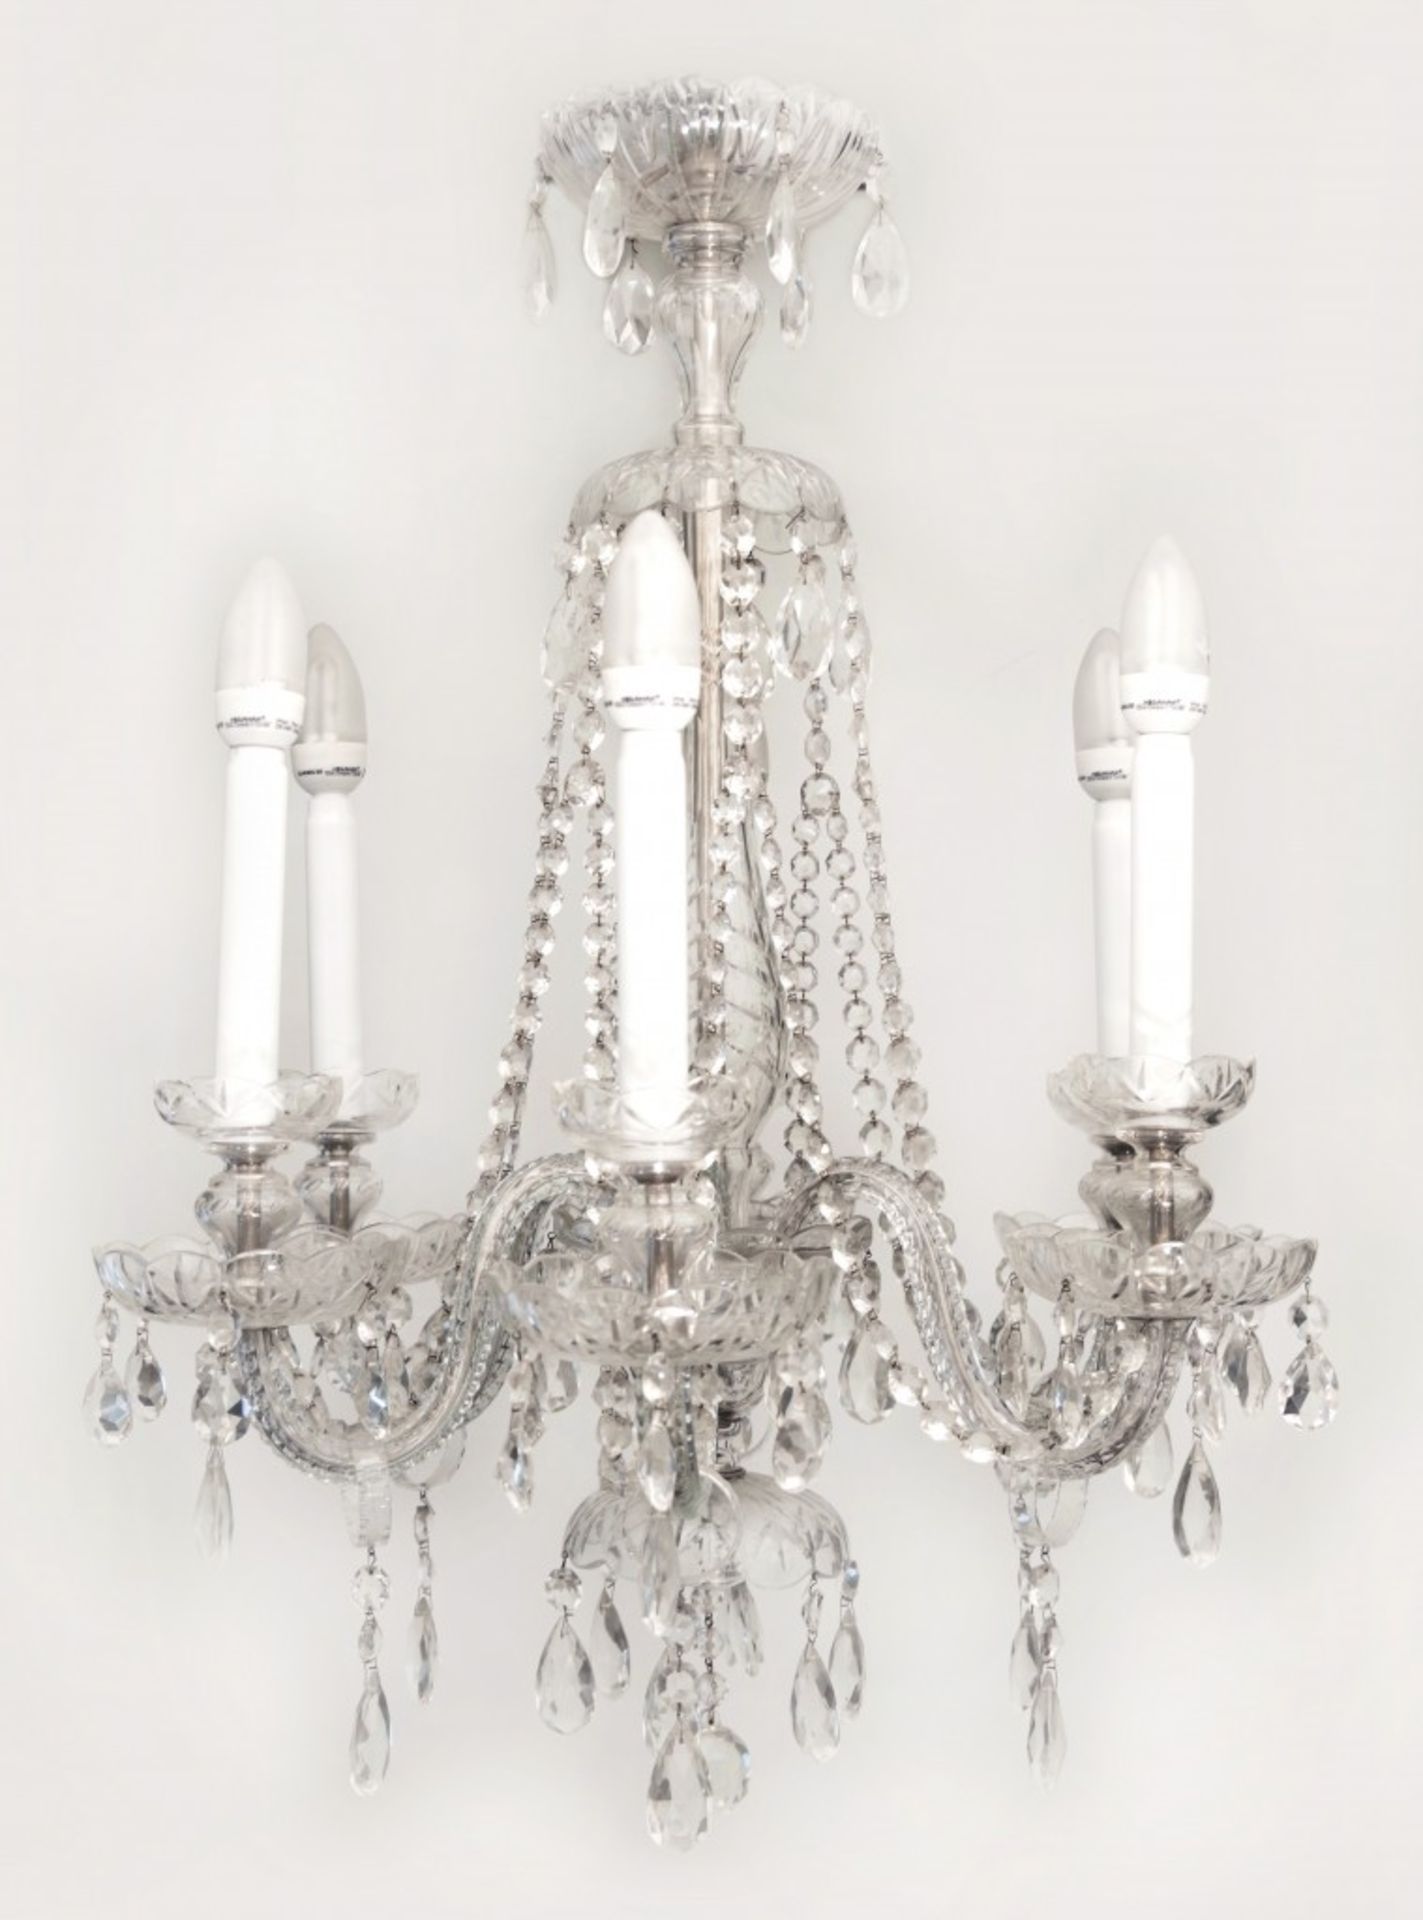 Six-arm crystal chandelier with trimmings